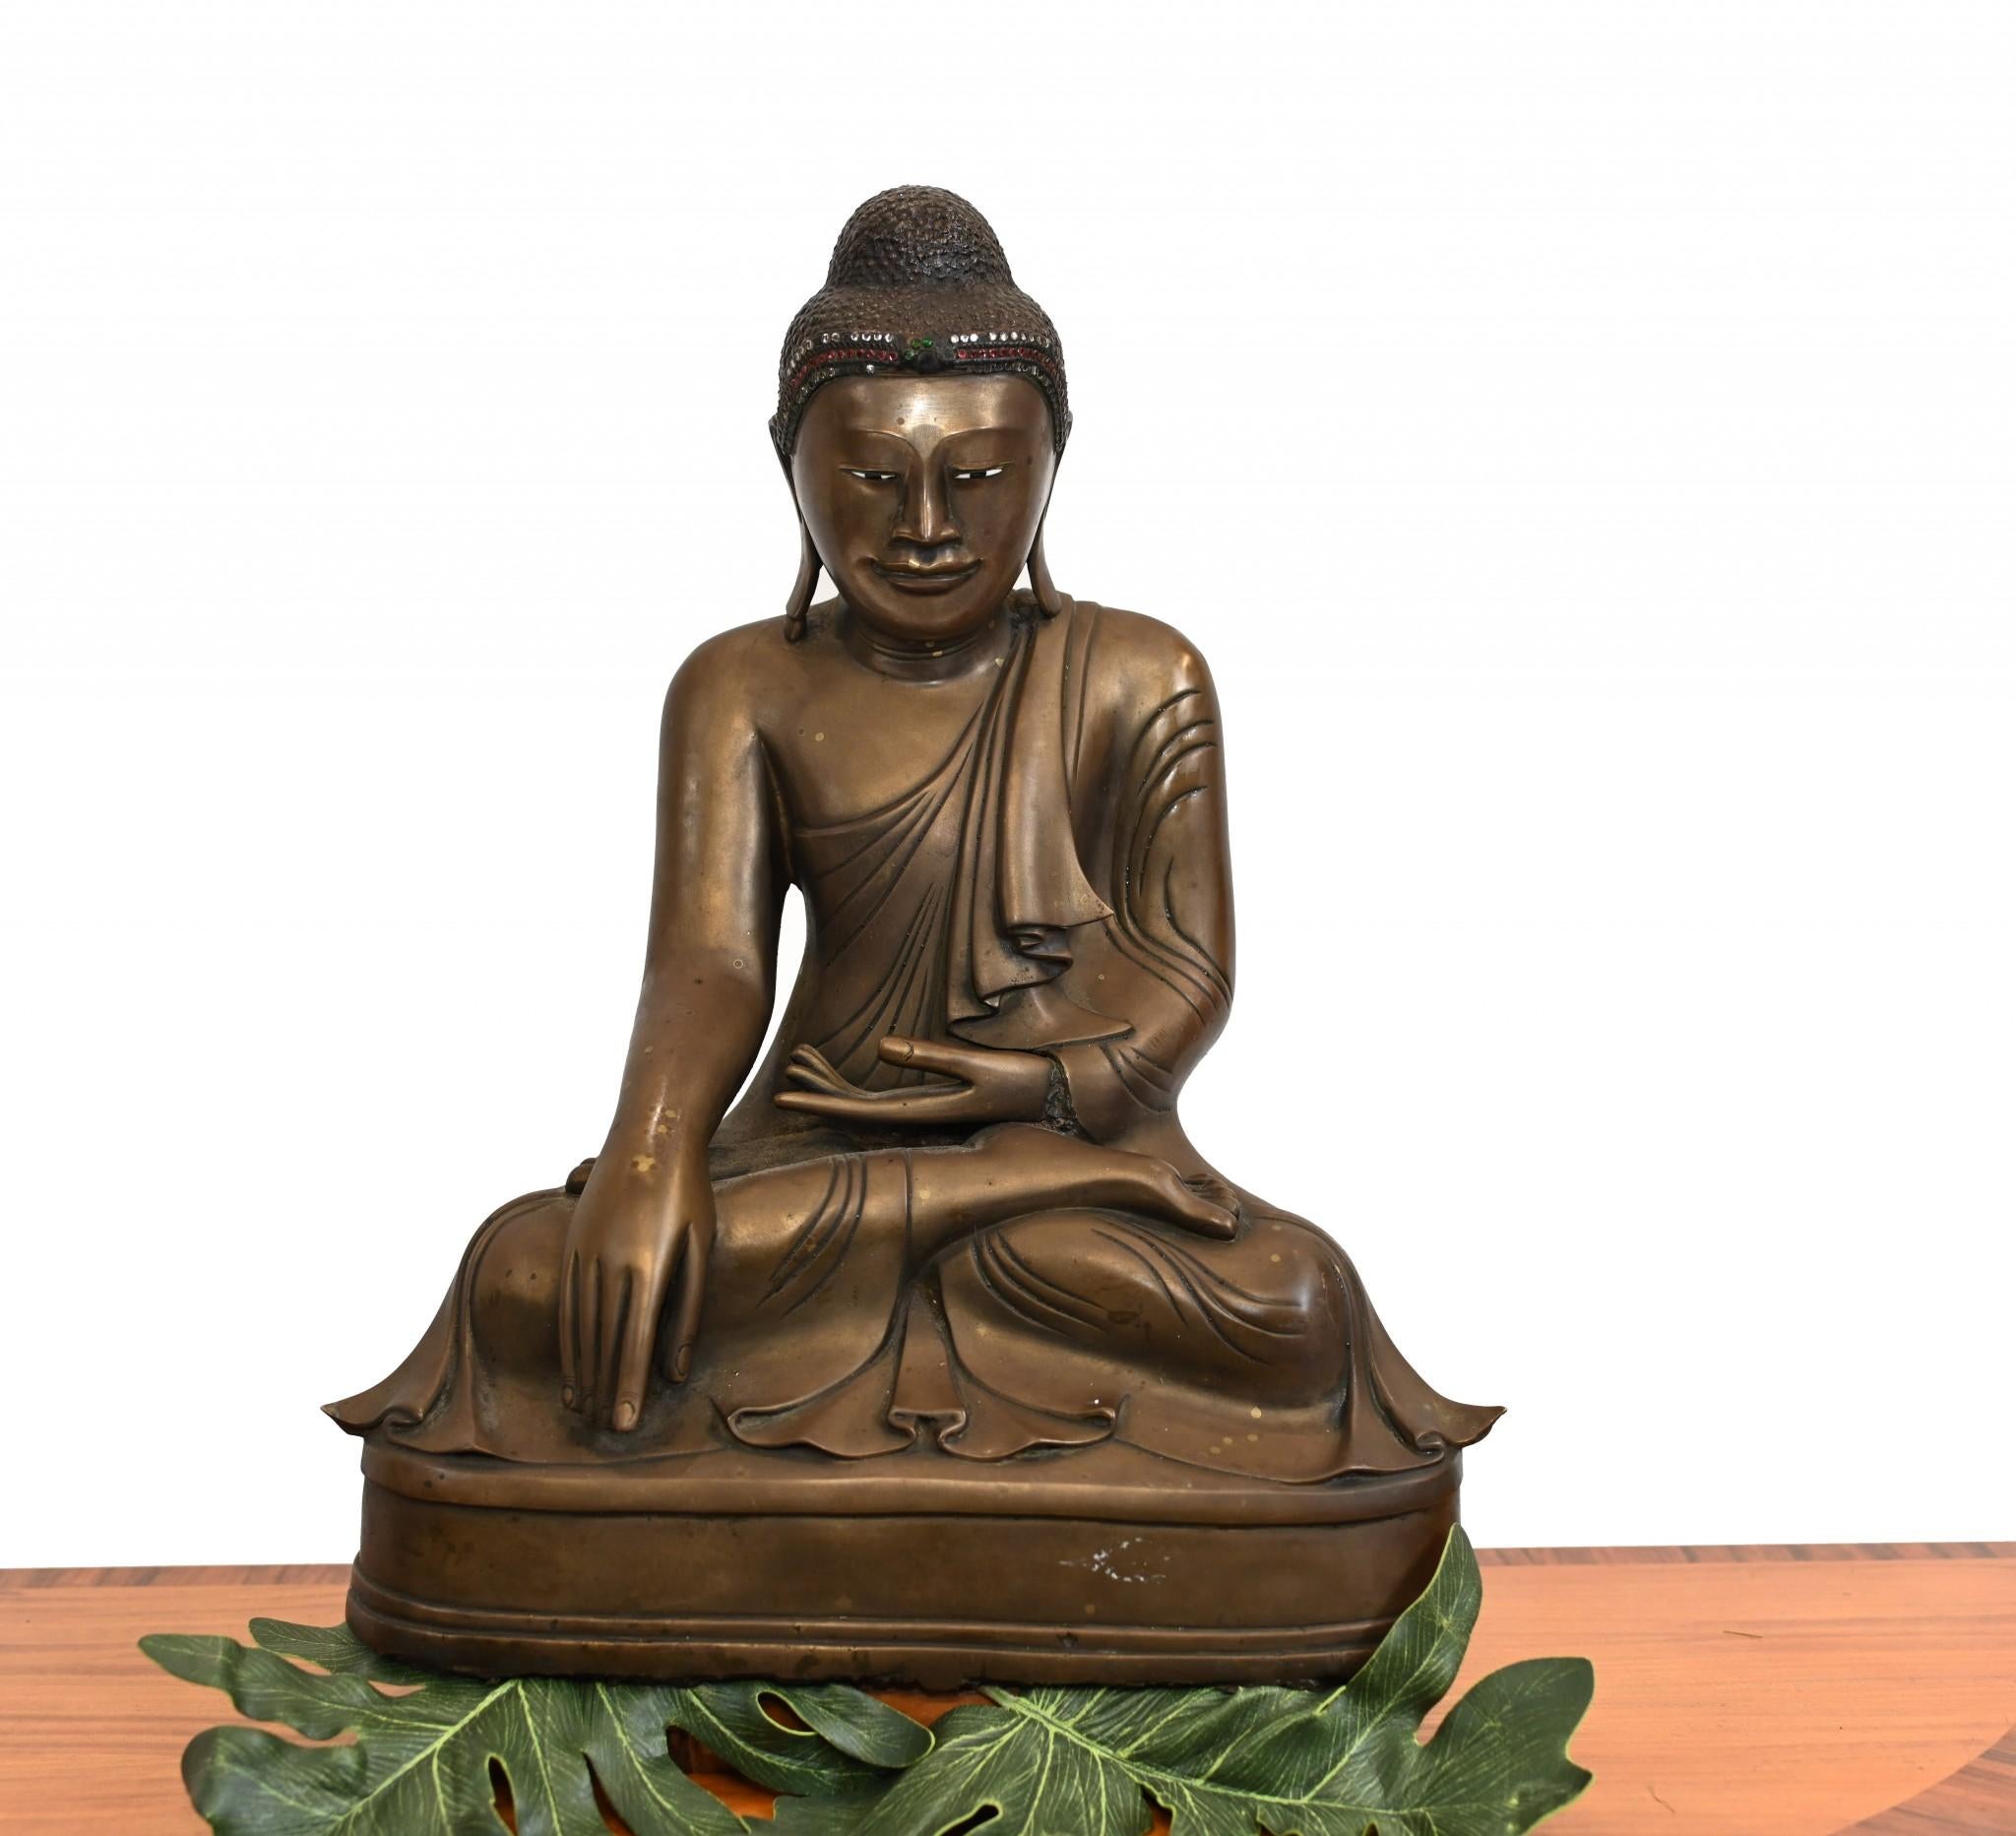 Gorgeous bronze meditating Buddha statue 
Great casting very solid with nice patina
Of course being bronze can live outside with no fear of rusting
Offered in great shape ready for home use right away
We ship to every corner of the